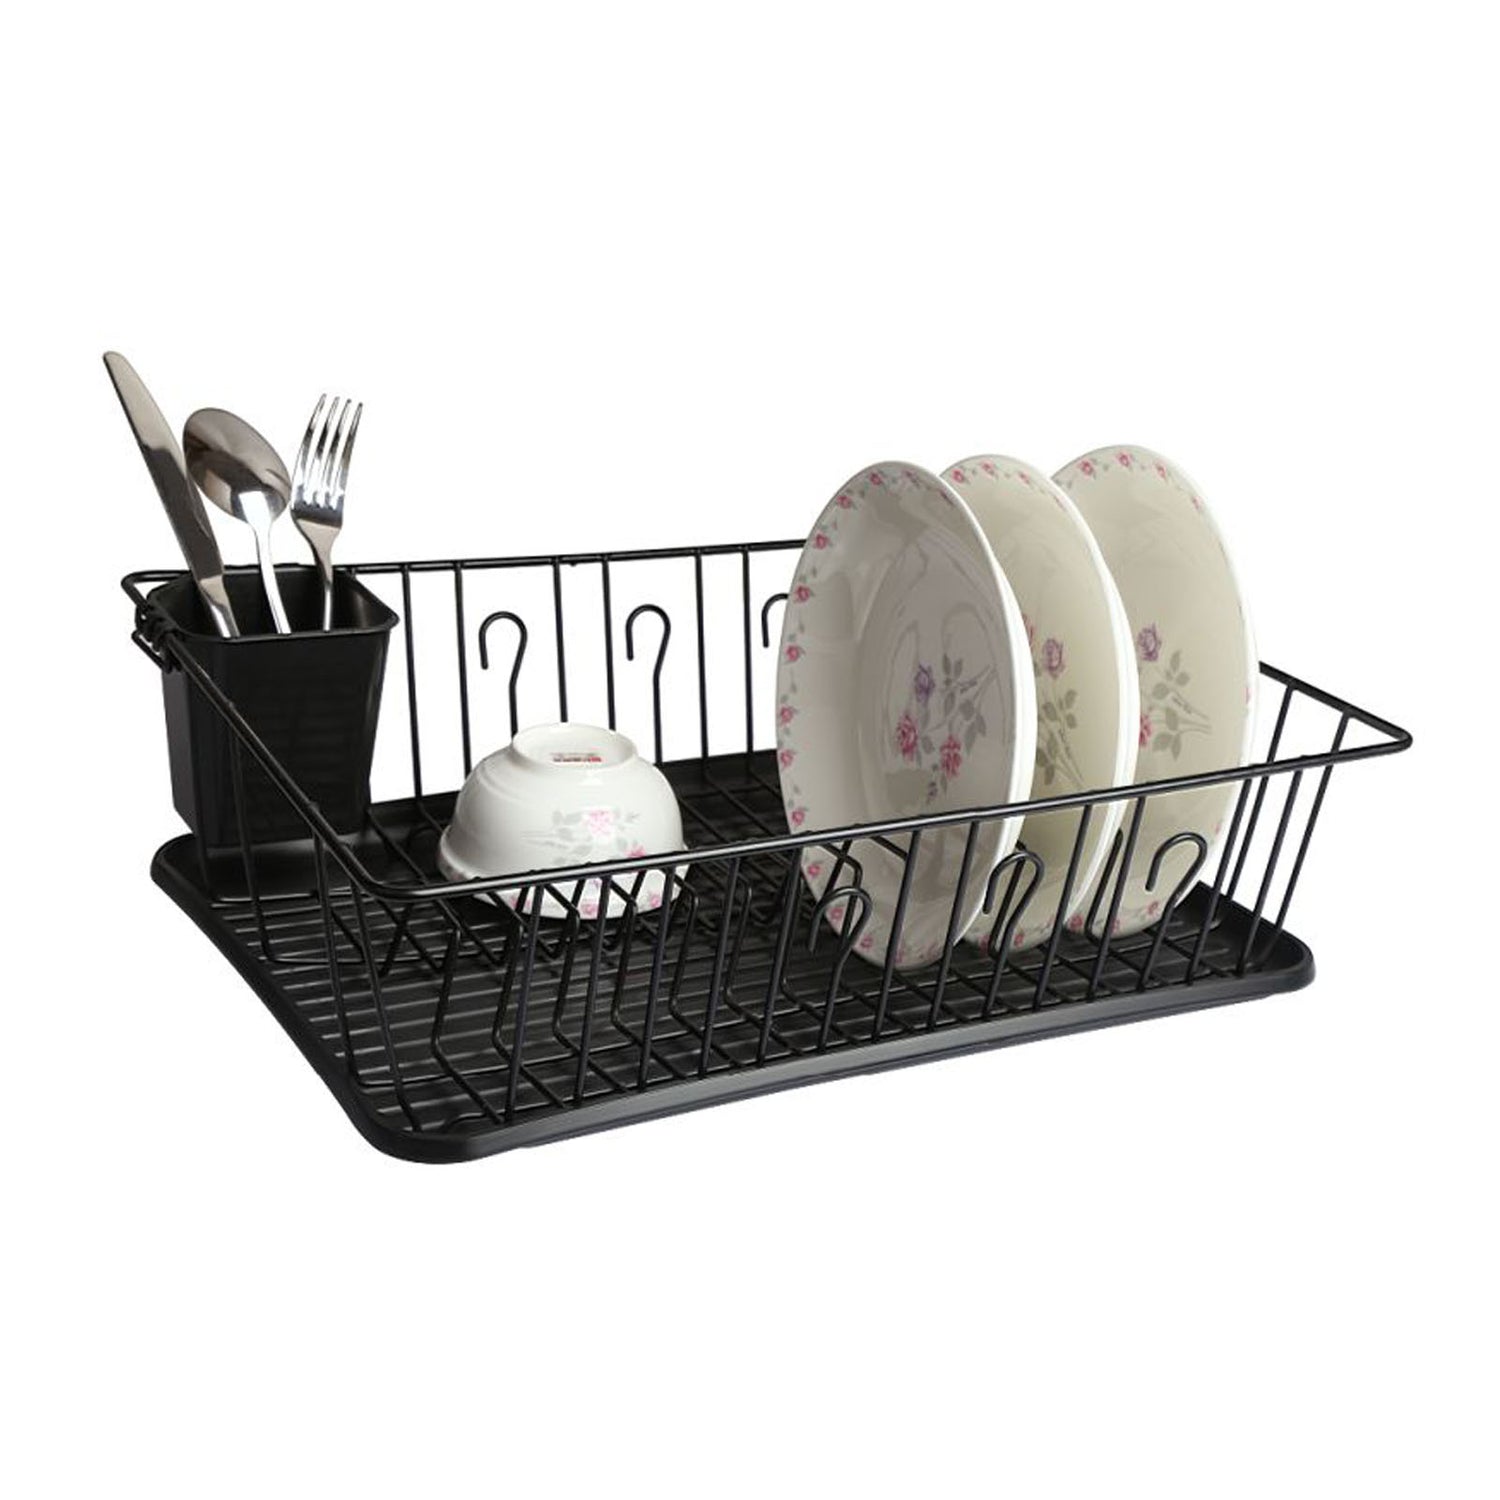 MEGACHEF MegaChef 17.5 Inch Black Dish Rack with 14 Plate Positioners and a Detachable Utensil Holder